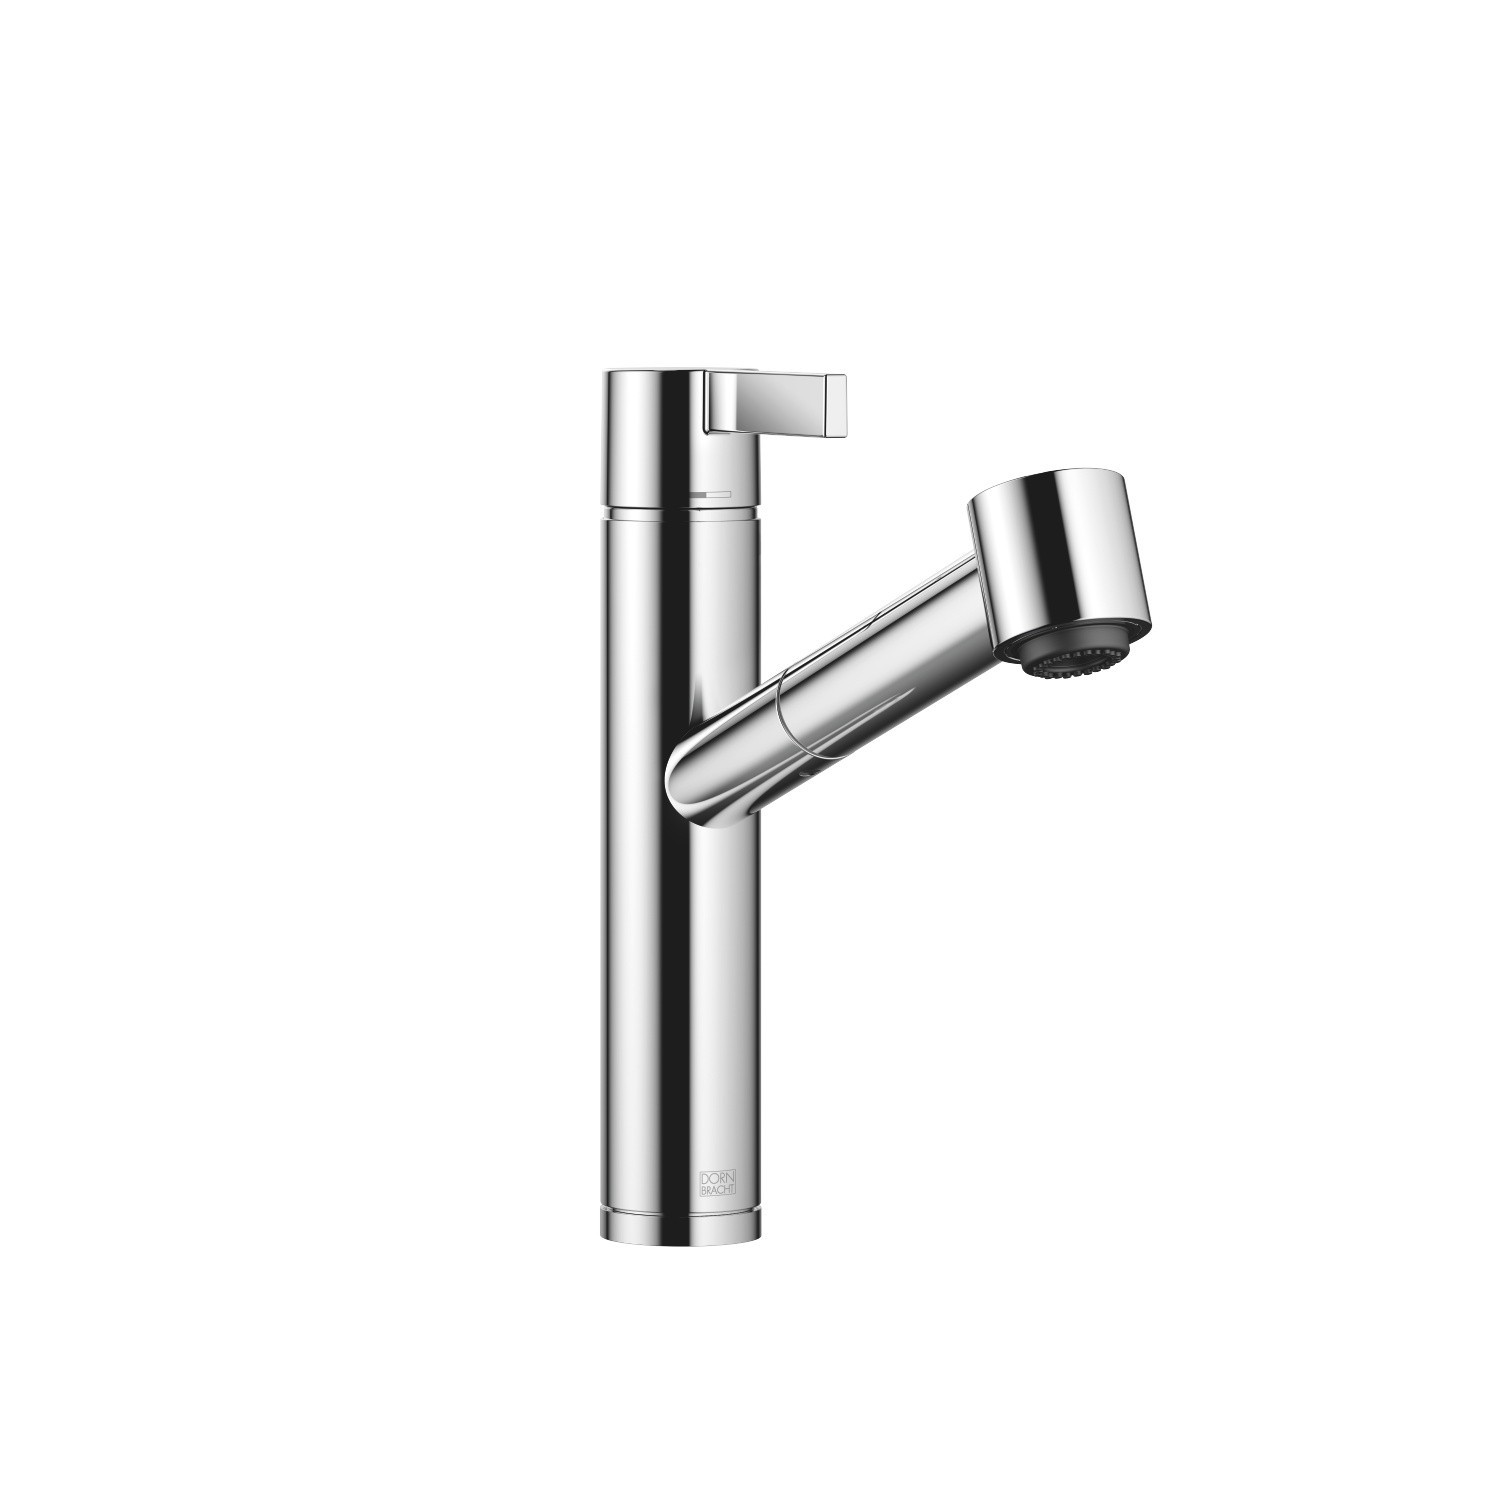 DORNBRACHT 33875760-0010 ENO SINGLE HOLE DECK MOUNT PULL OUT KITCHEN FAUCET WITH SPRAY FUNCTION AND LEVER HANDLE